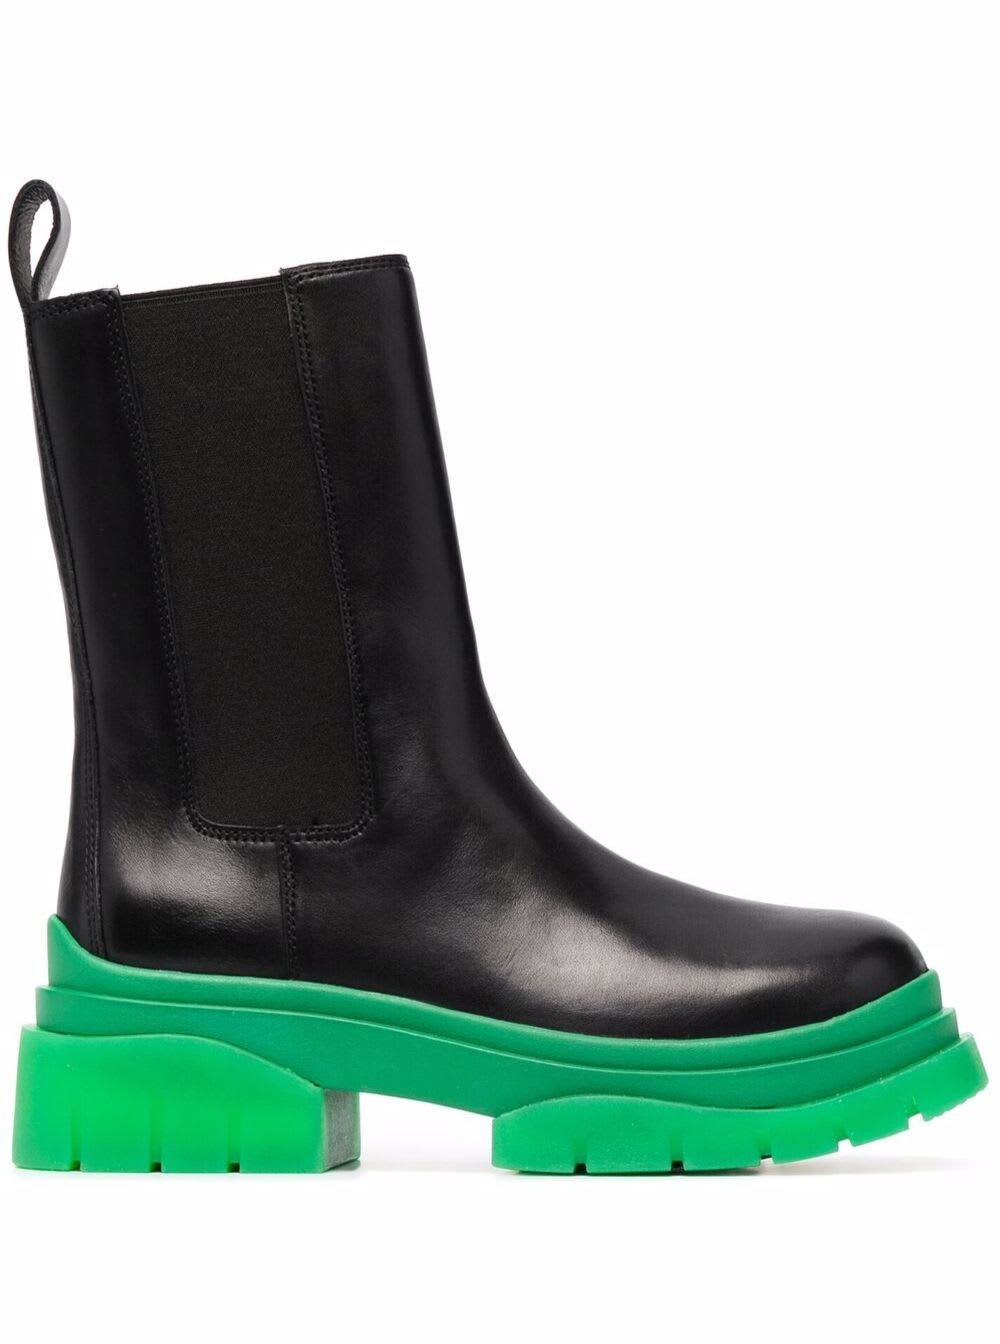 Ash Black Leather Boots With Green Chunky Sole